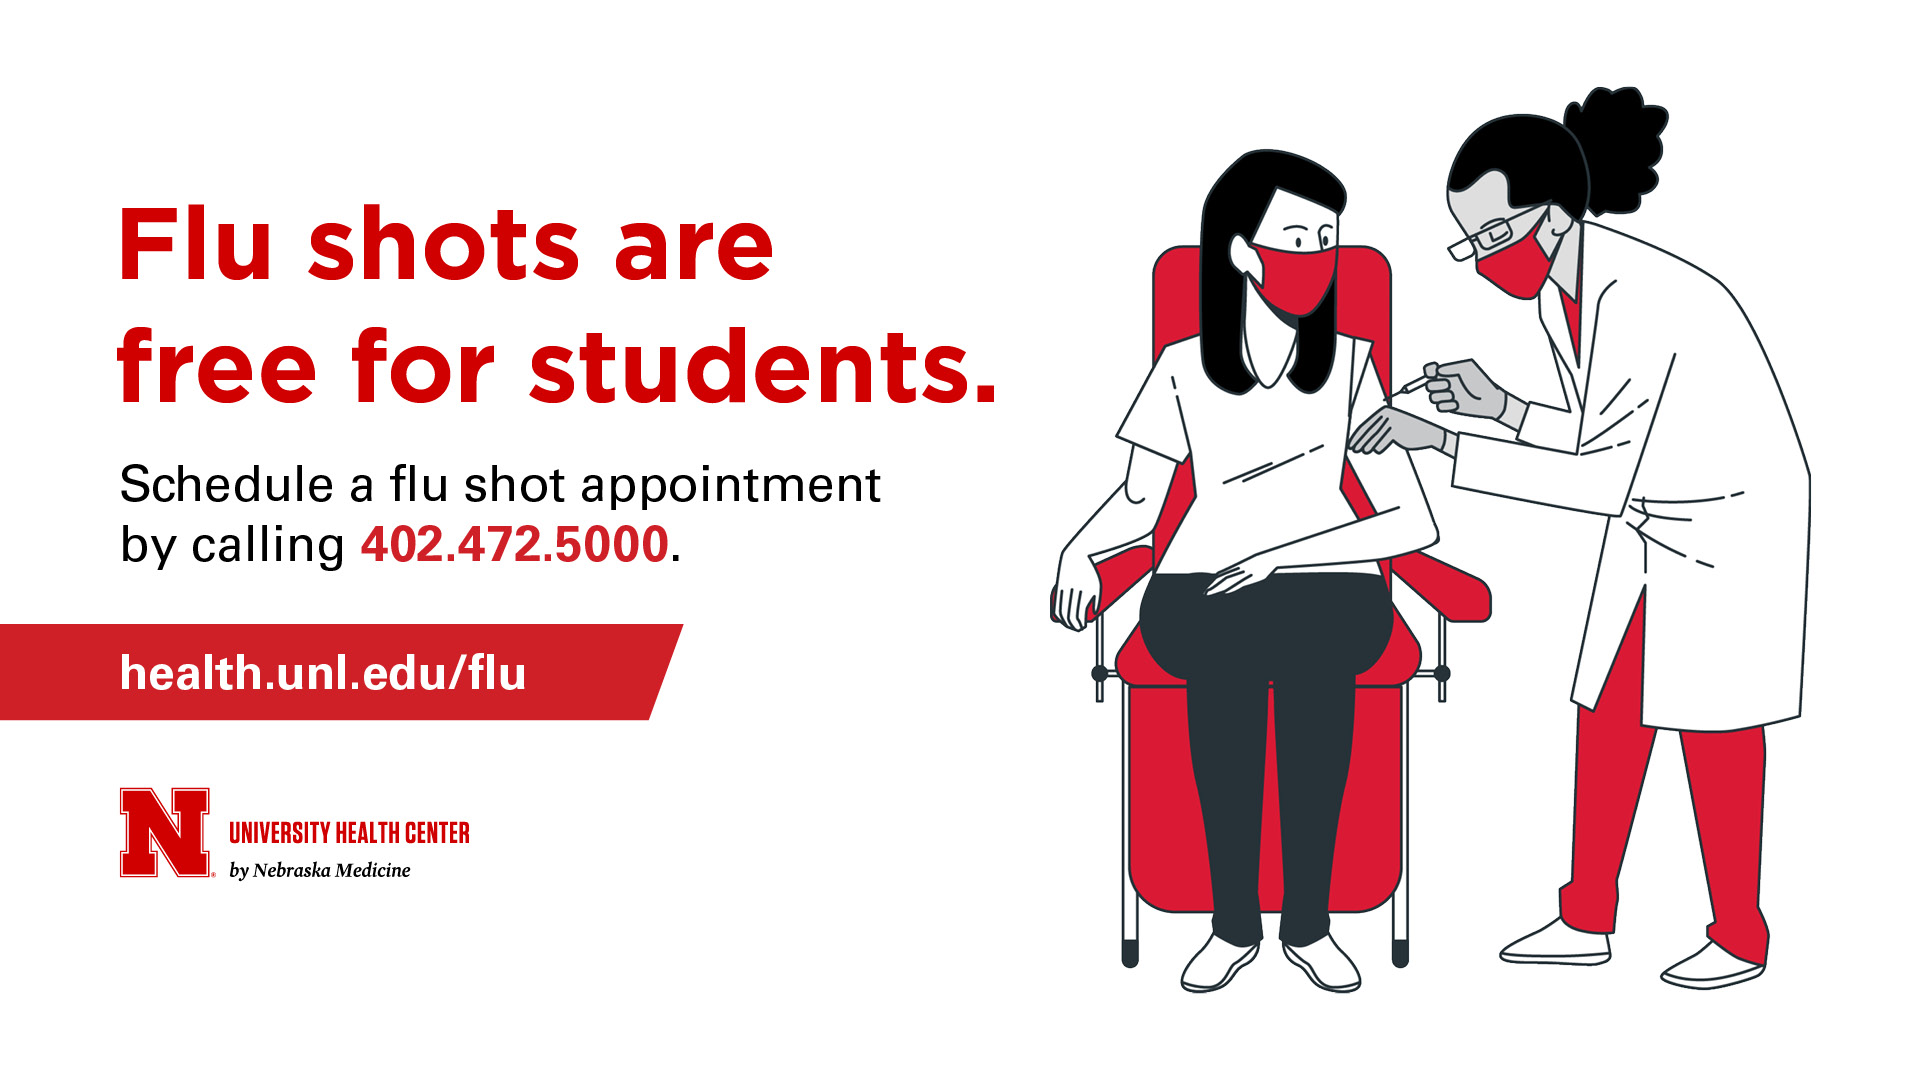 Schedule a flu shot appointment by calling 402-472-5000